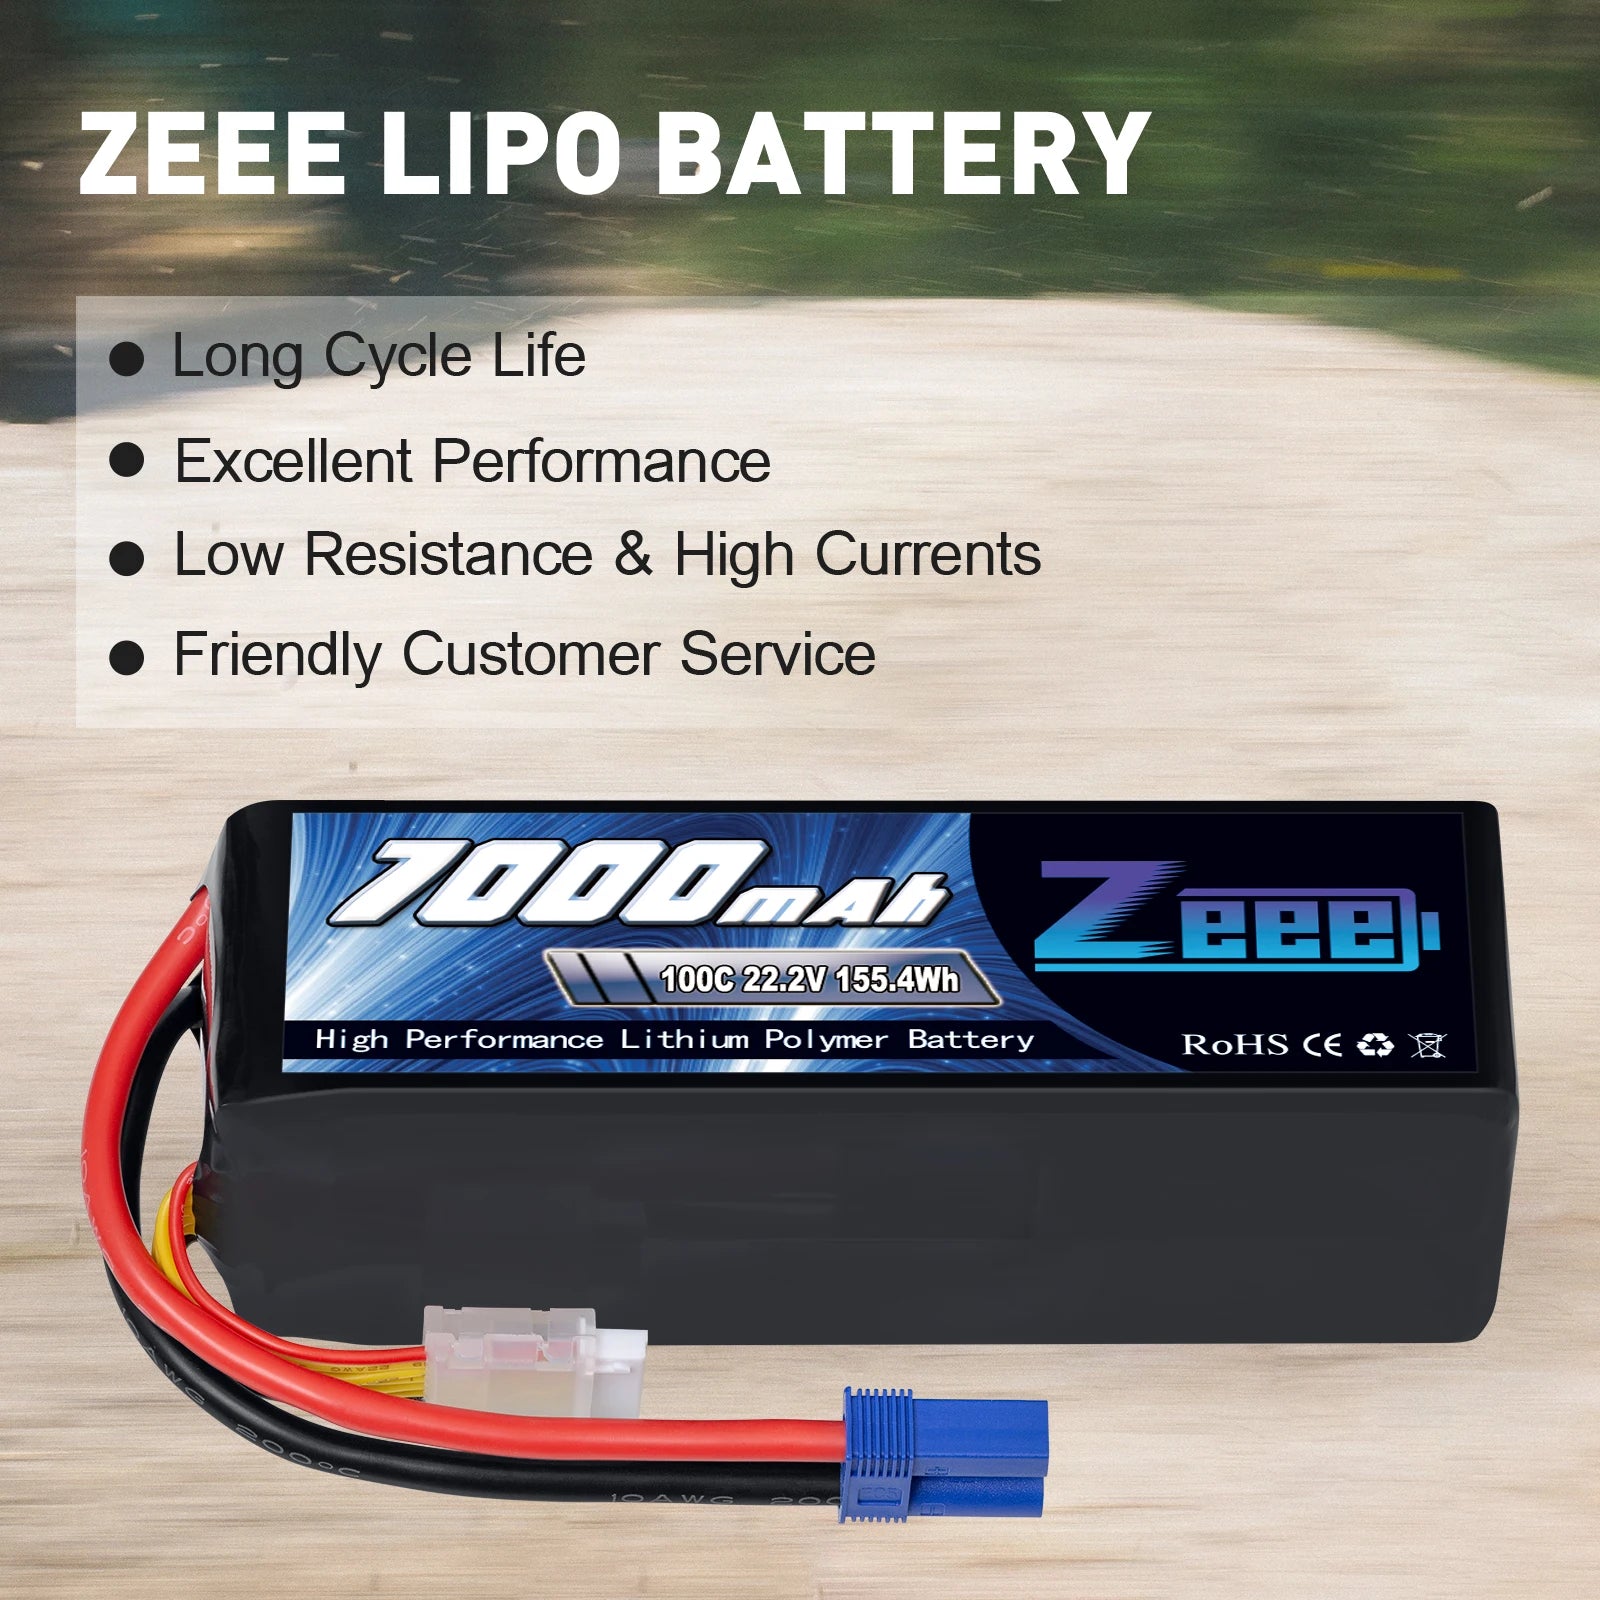 2Units Zeee Lipo Battery, ZEEE Lipo BATTERY Long Cycle Life Excellent Performance Low Resistance & High